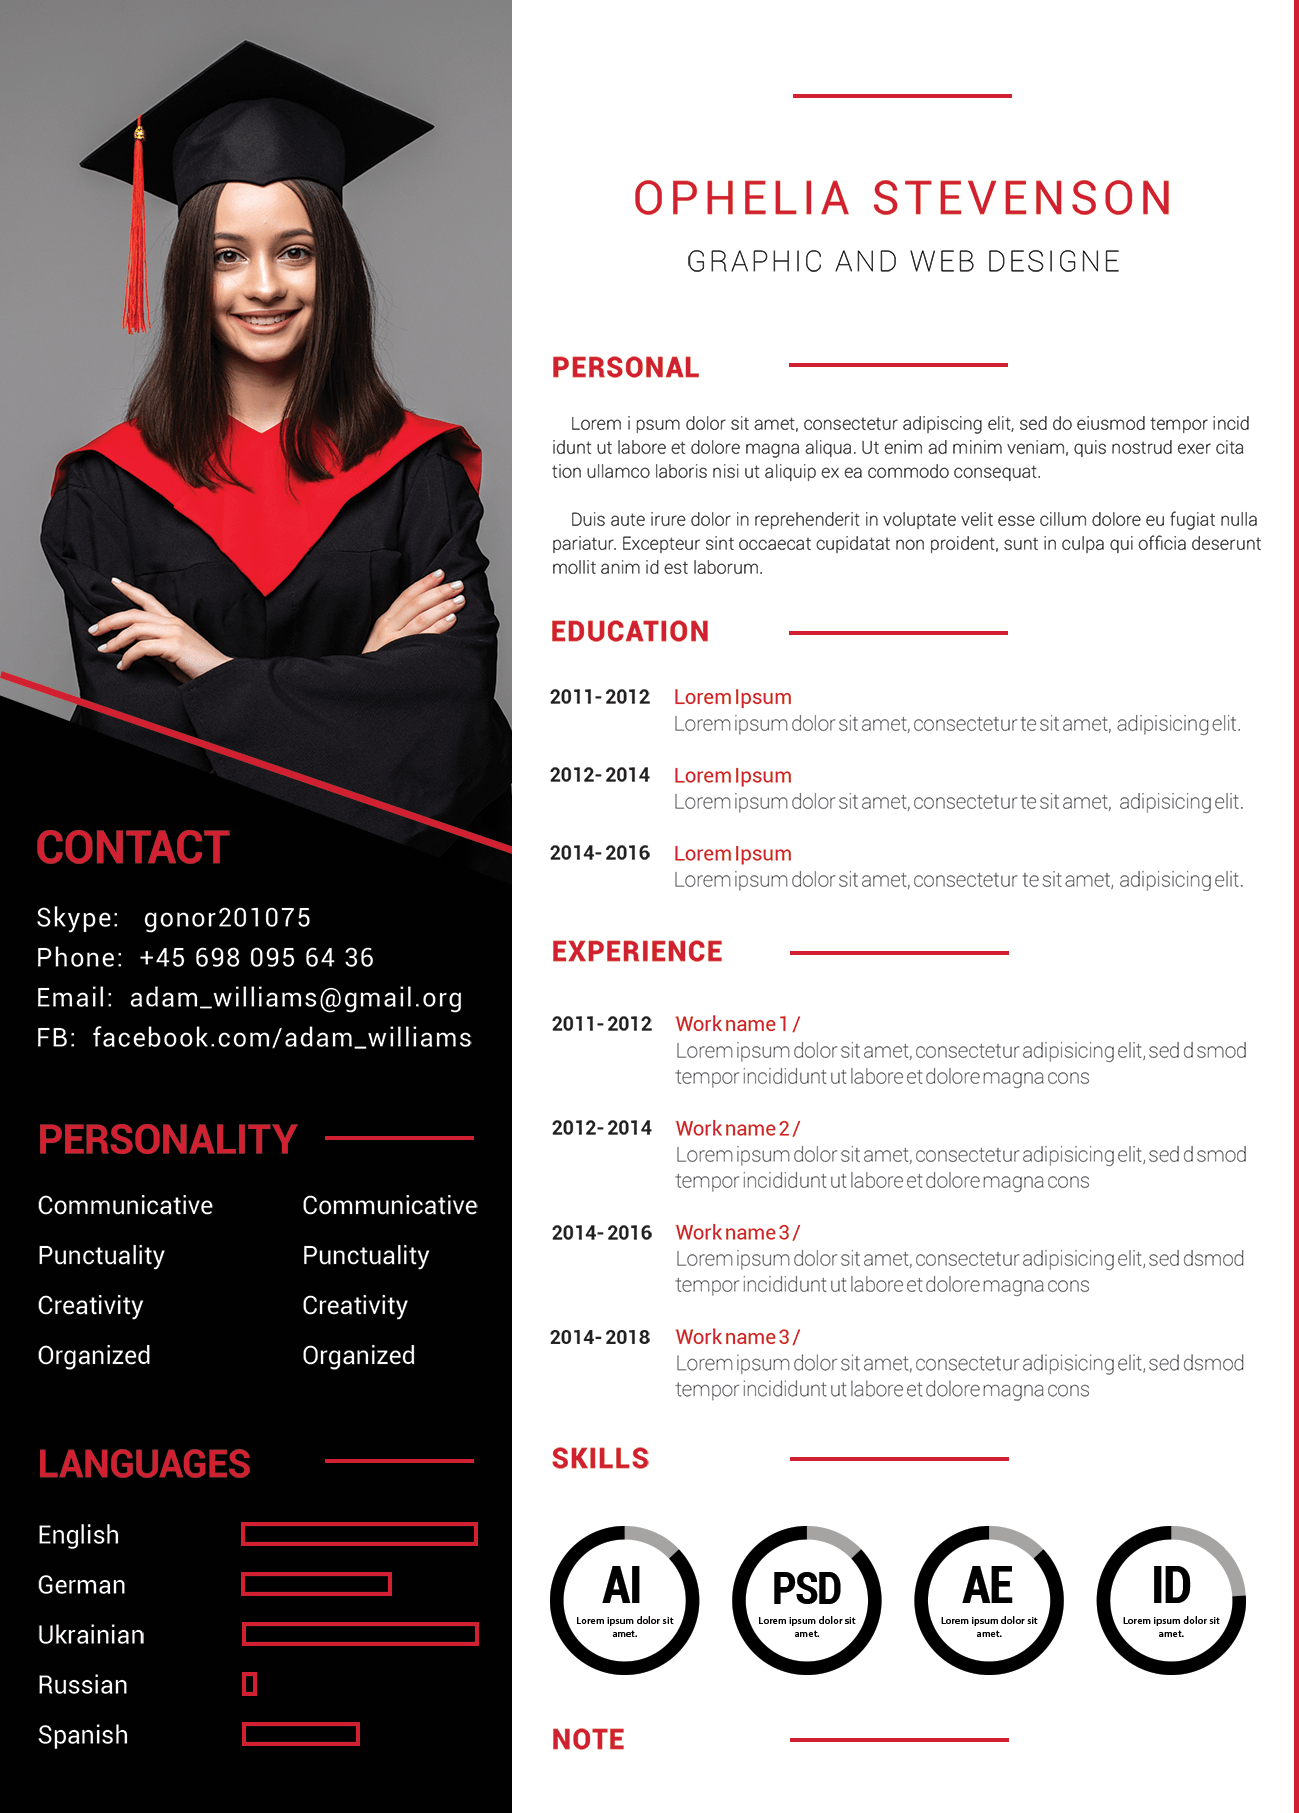 CV and cover letter free PSD